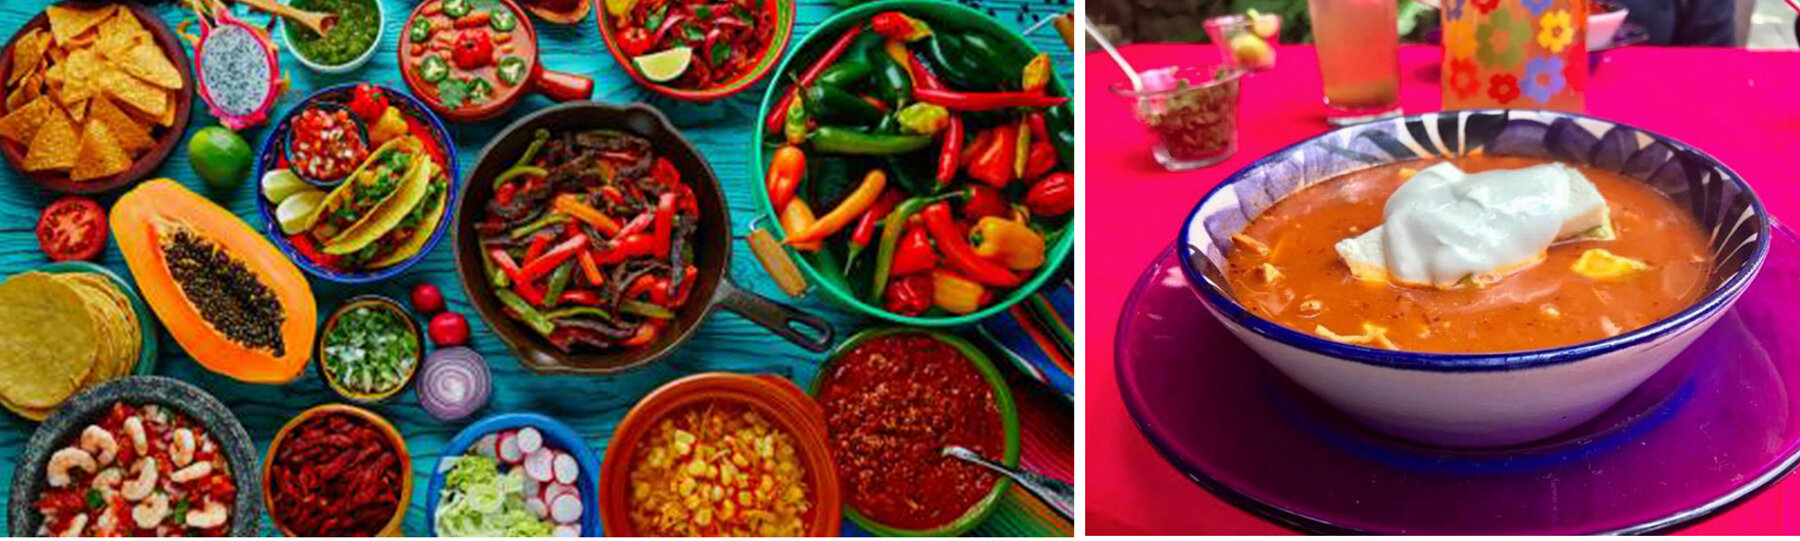 Mexican Food Composite.jpg